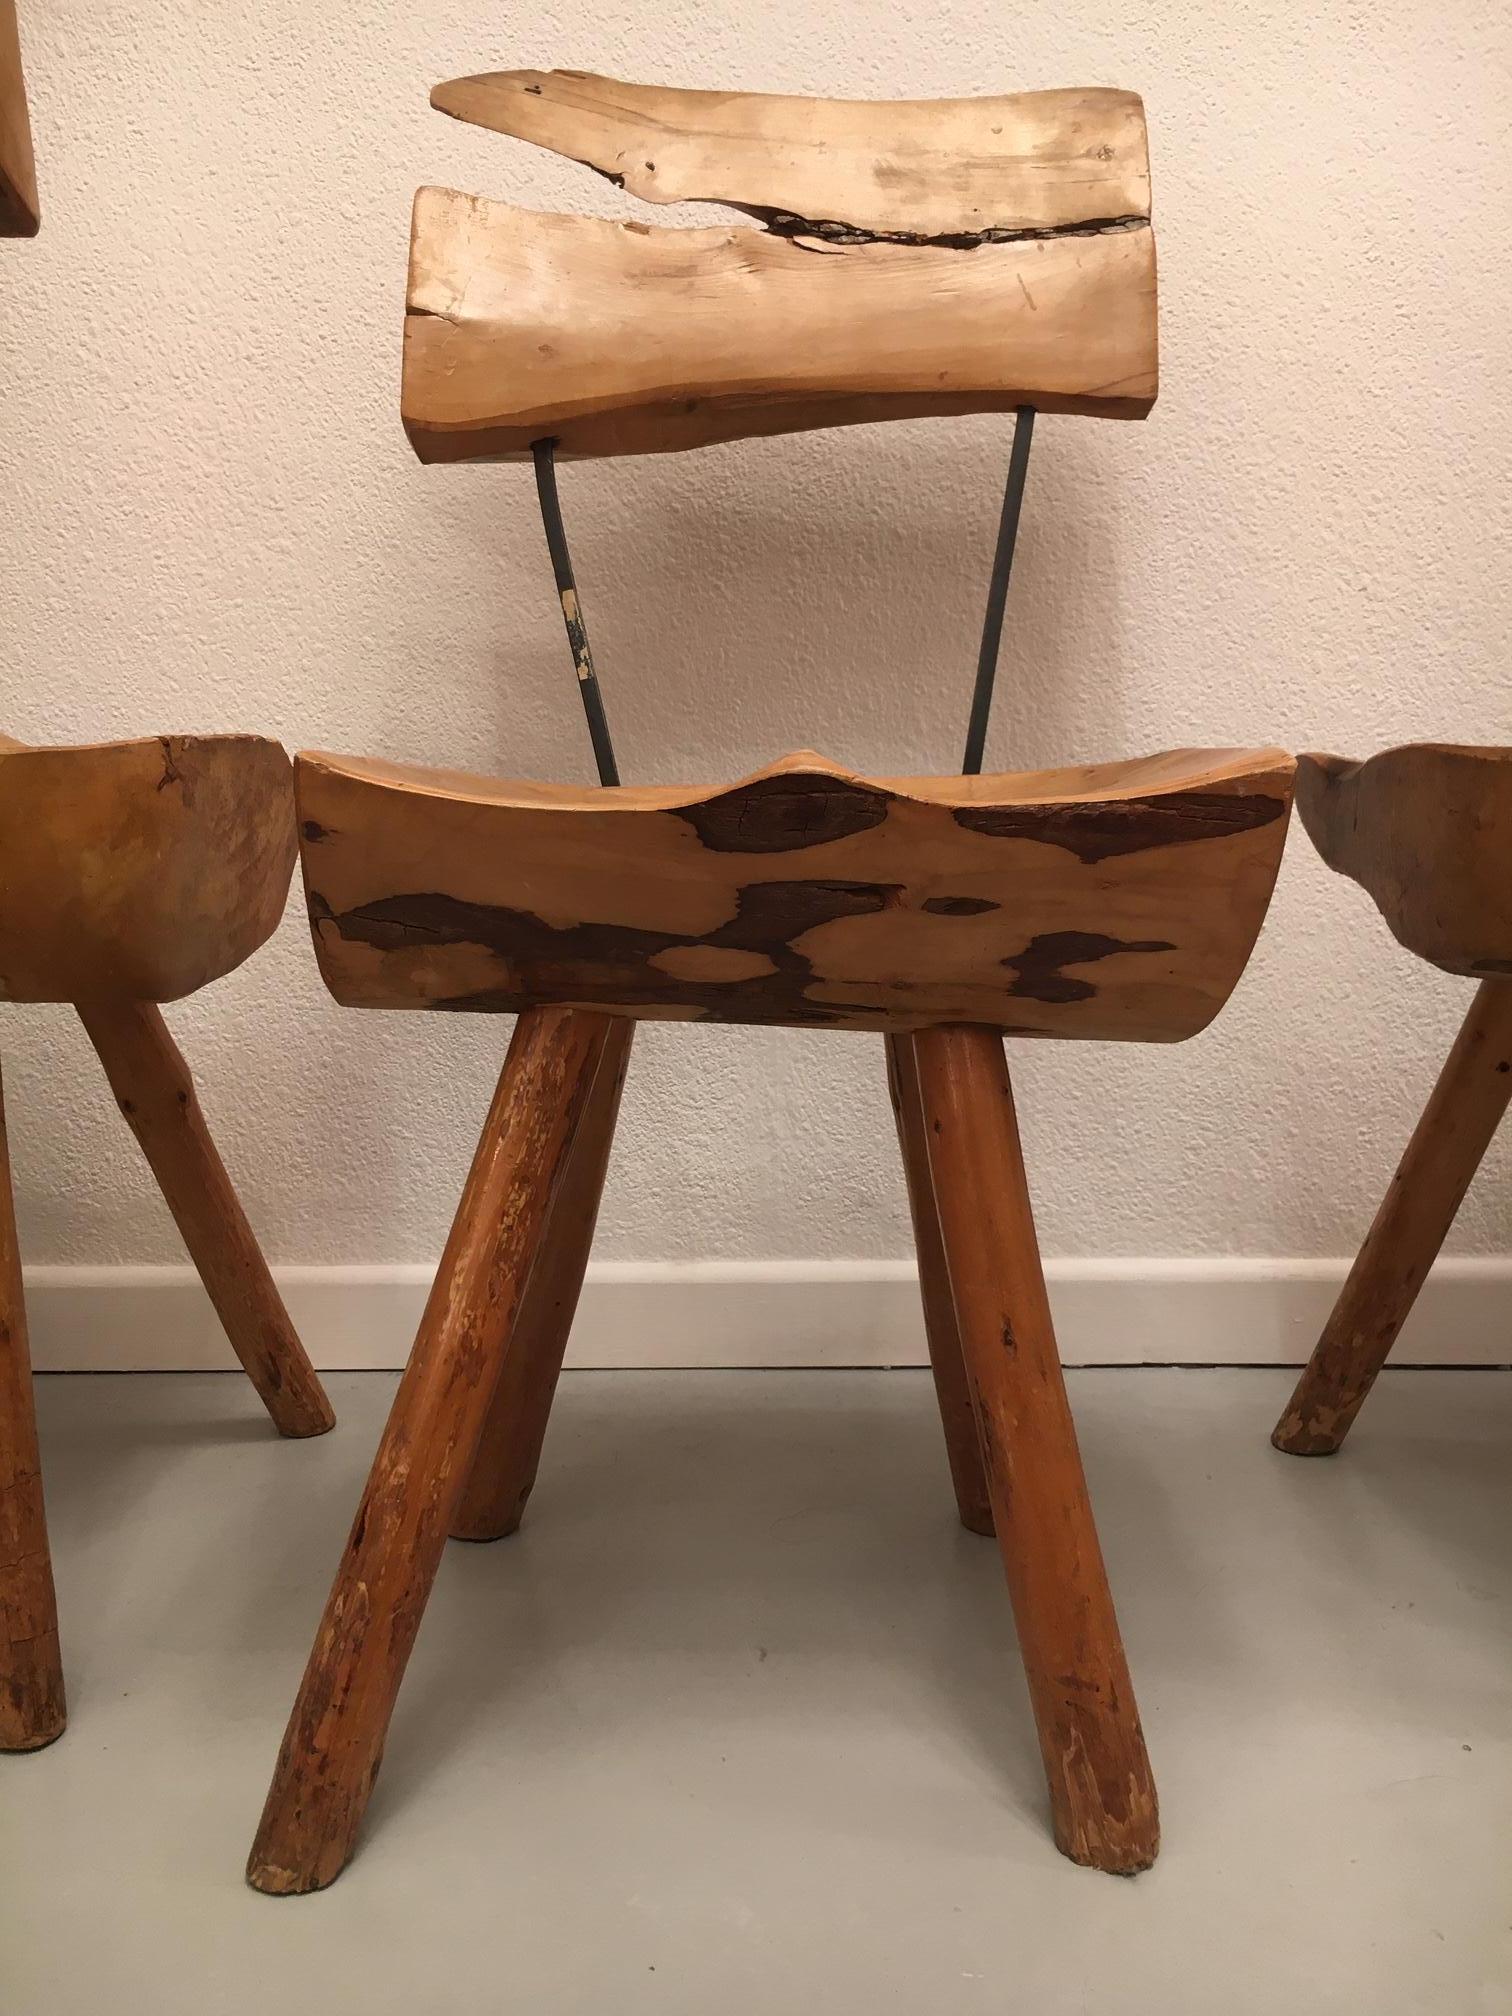 Set of 5 Solid Olive Wood Brutalist Rustic Dining Chairs, circa 1950s For Sale 7